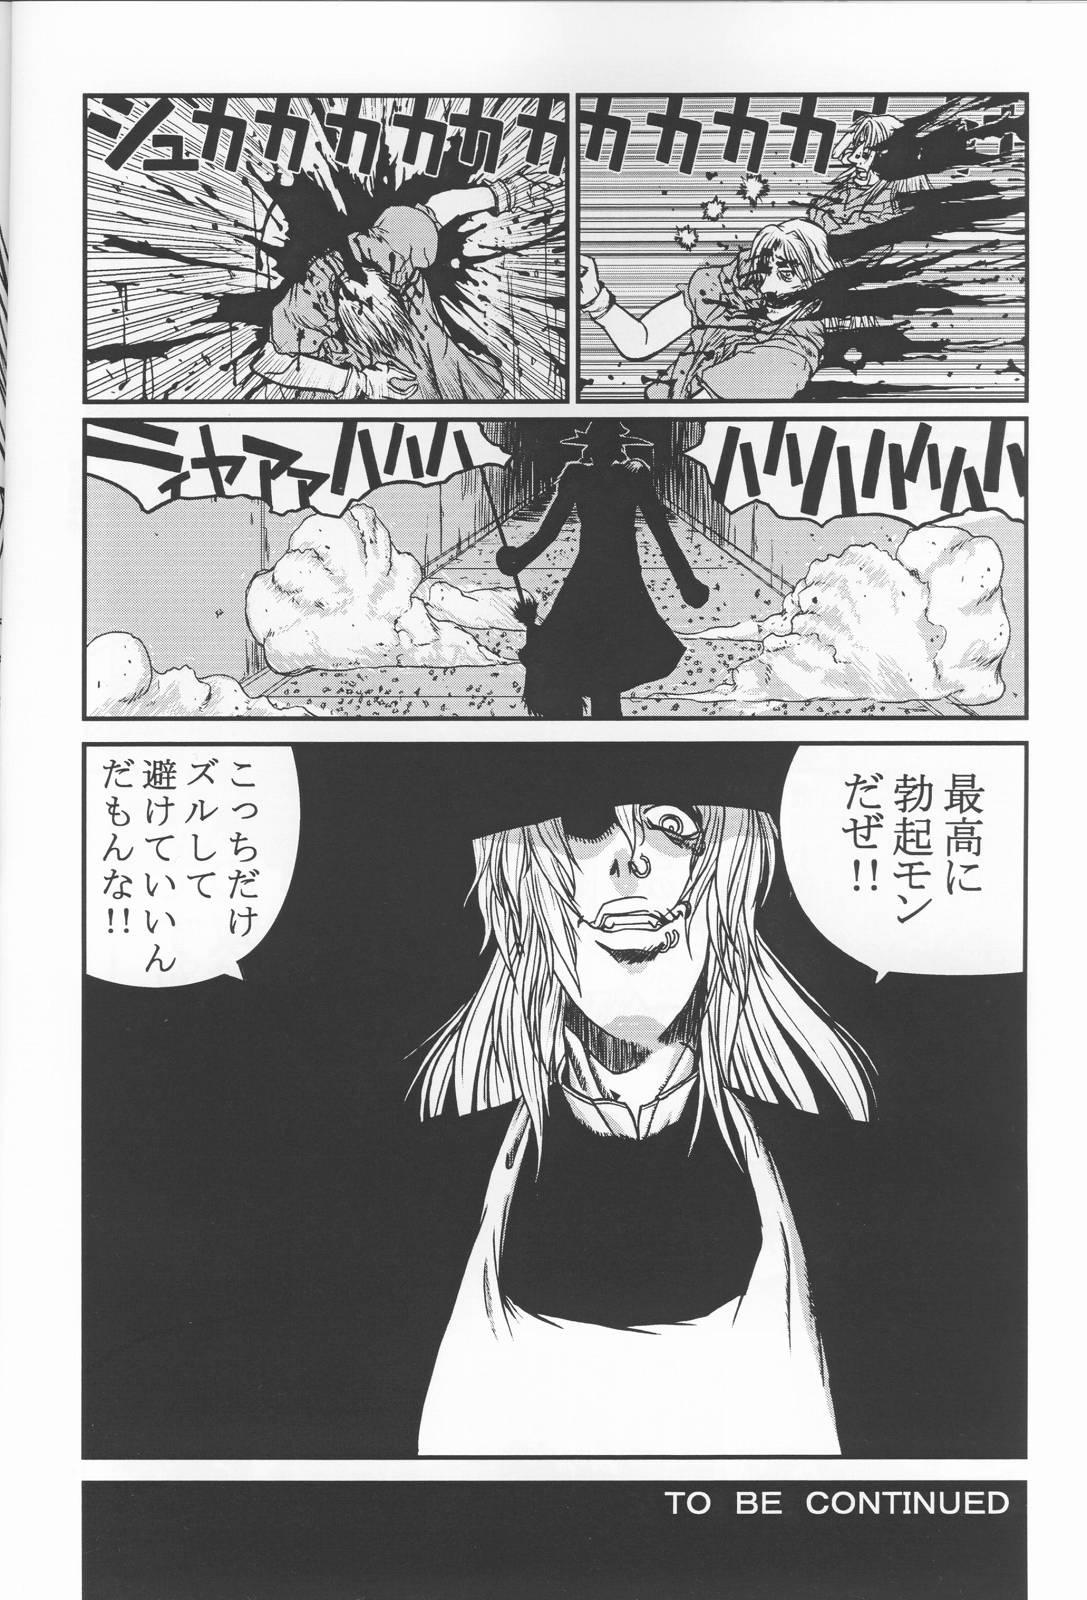 Cut HELLSING？ - Touhou project Shemales - Page 11